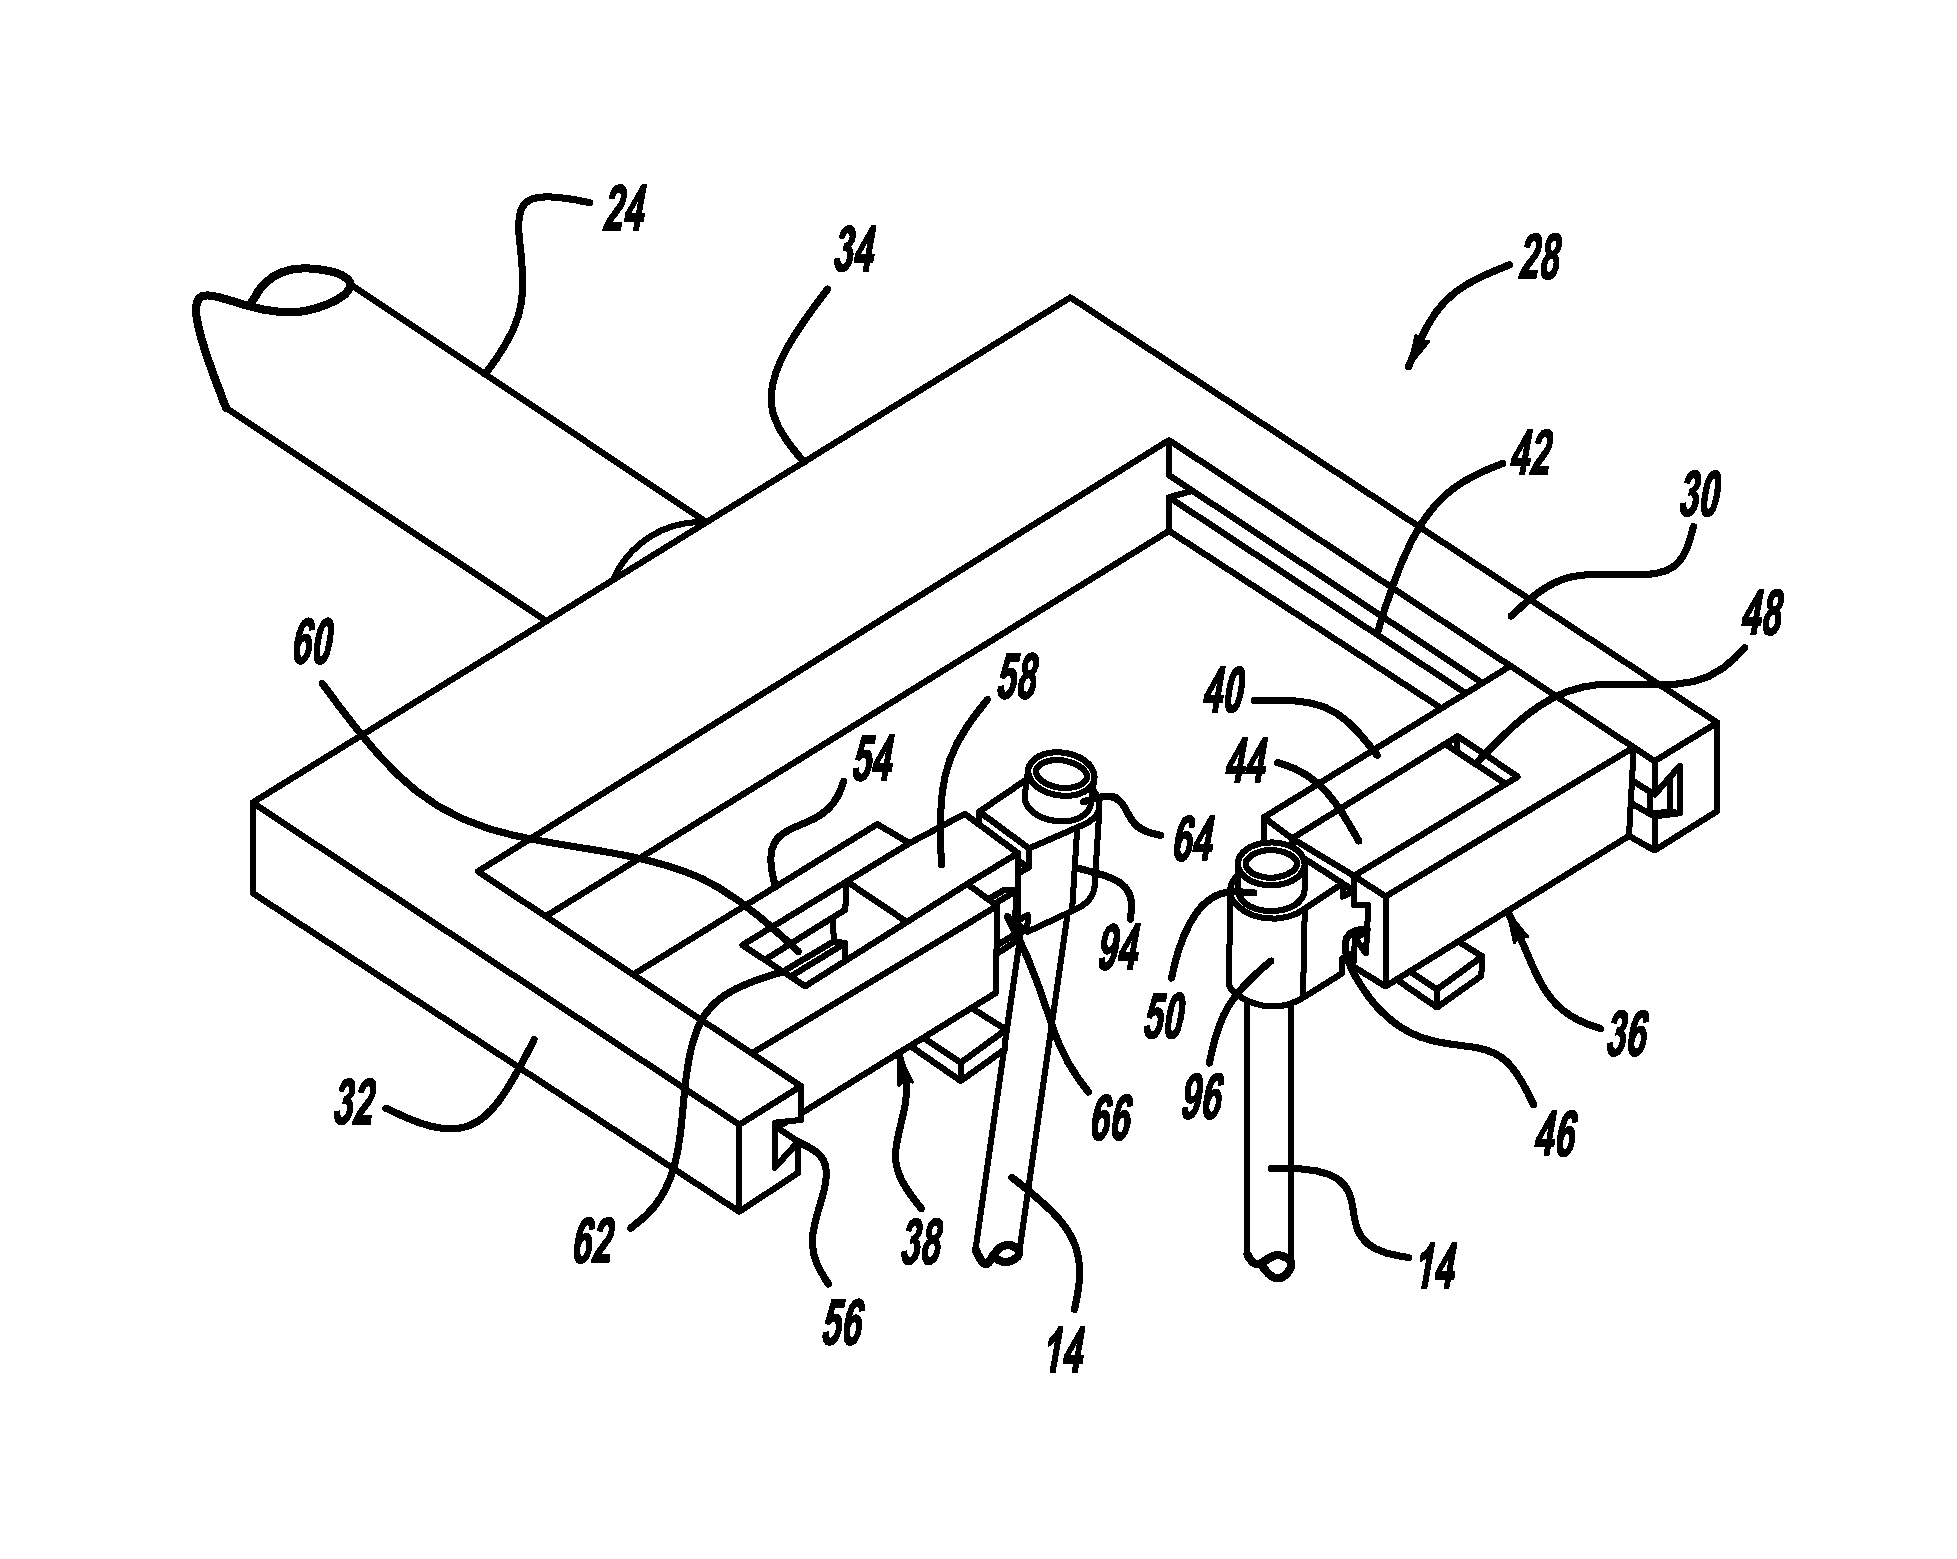 Robotic surgical device implant system